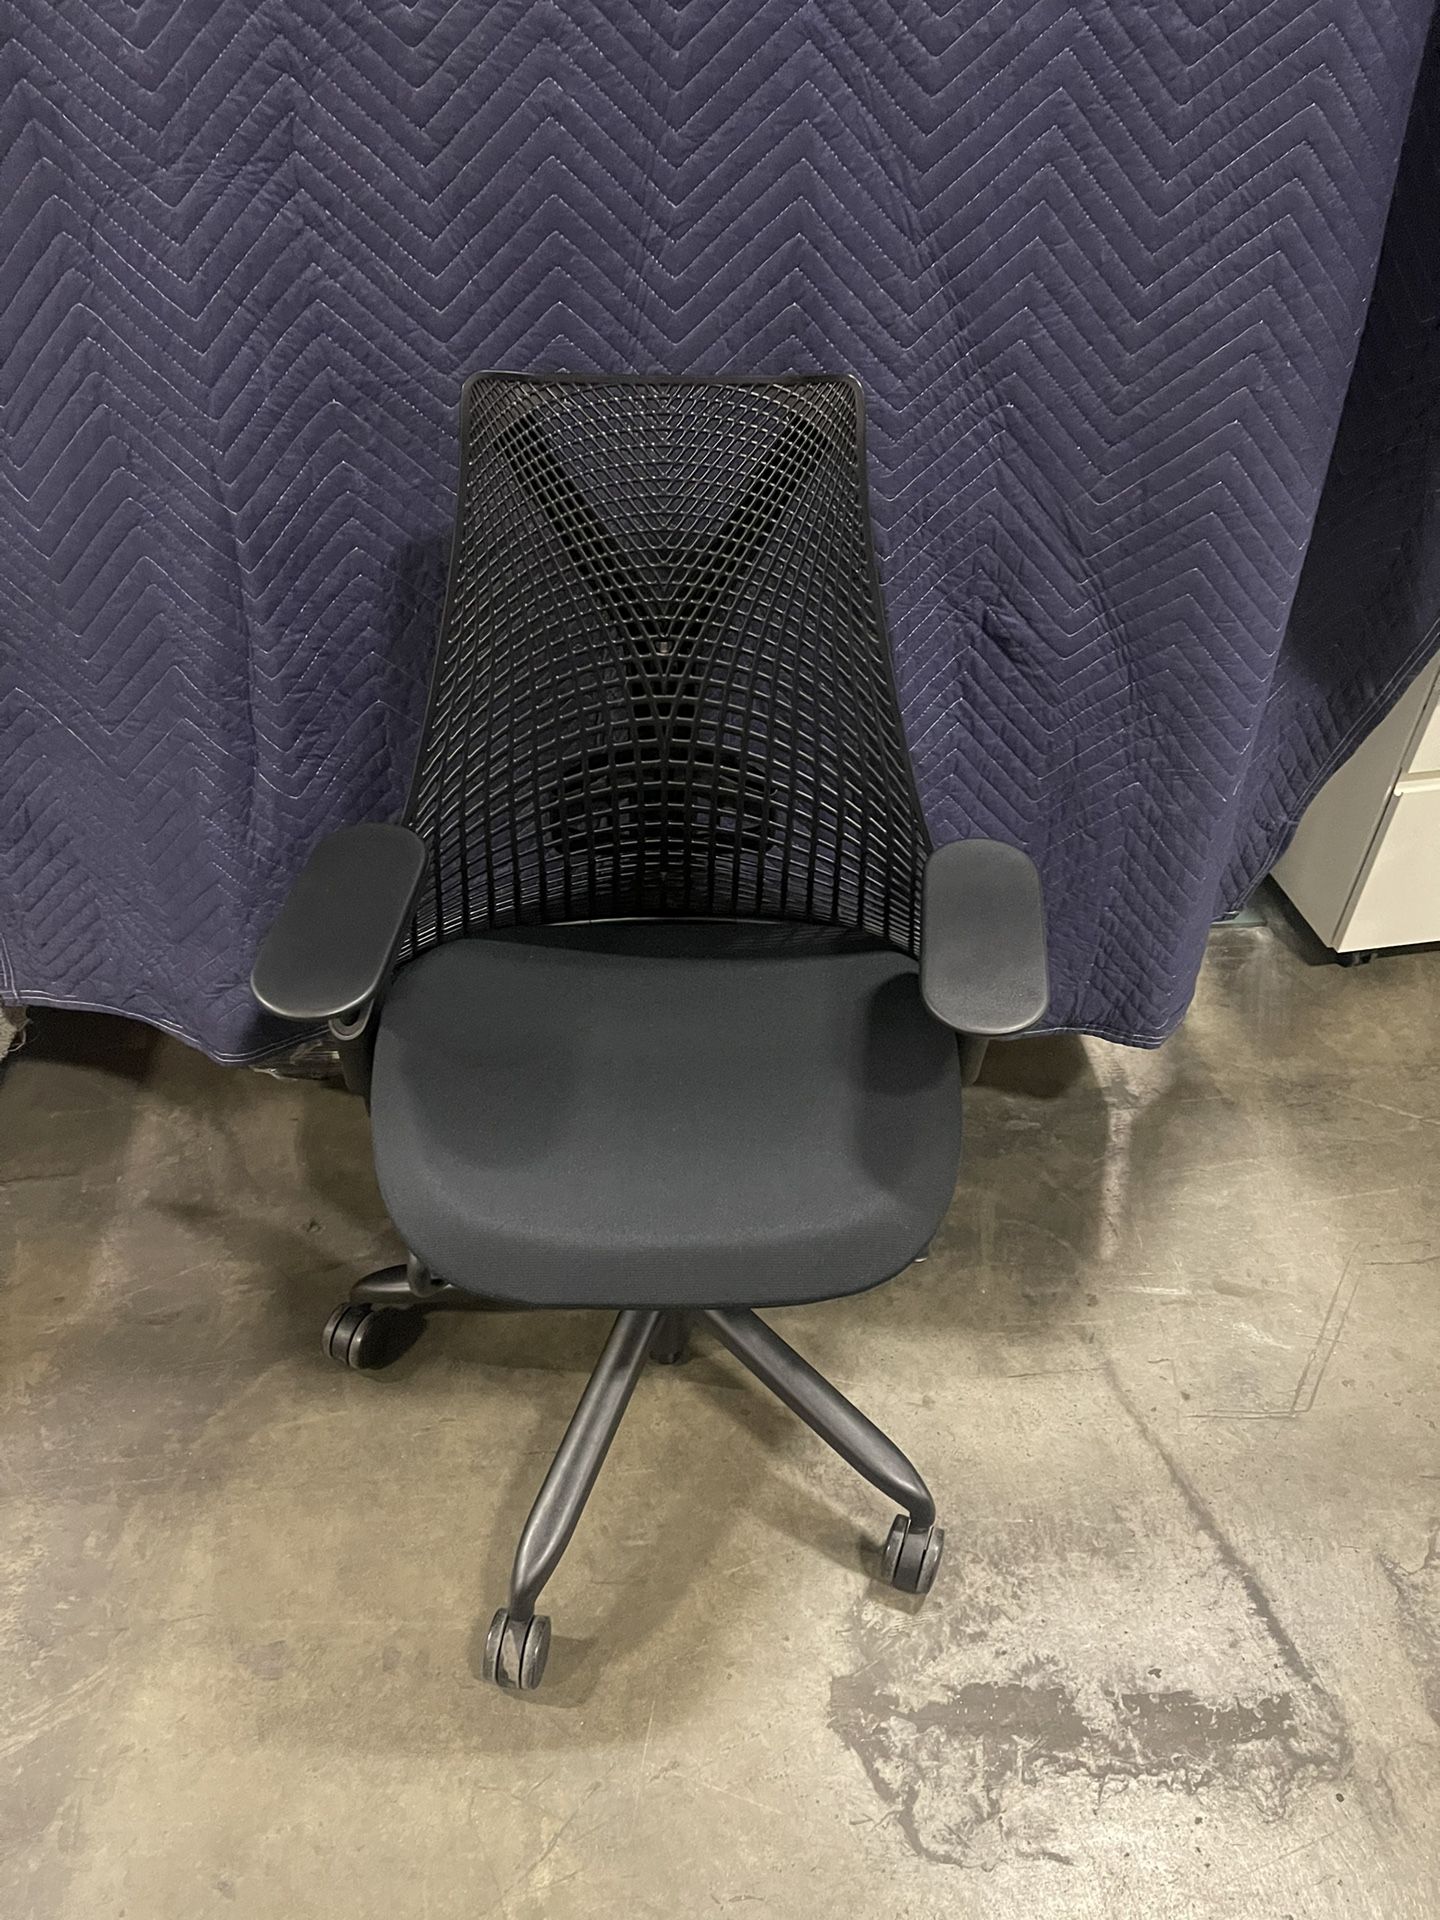 Herman Miller Sayl Chair Fully Loaded! We Also Have Standing Desks And File Cabs!